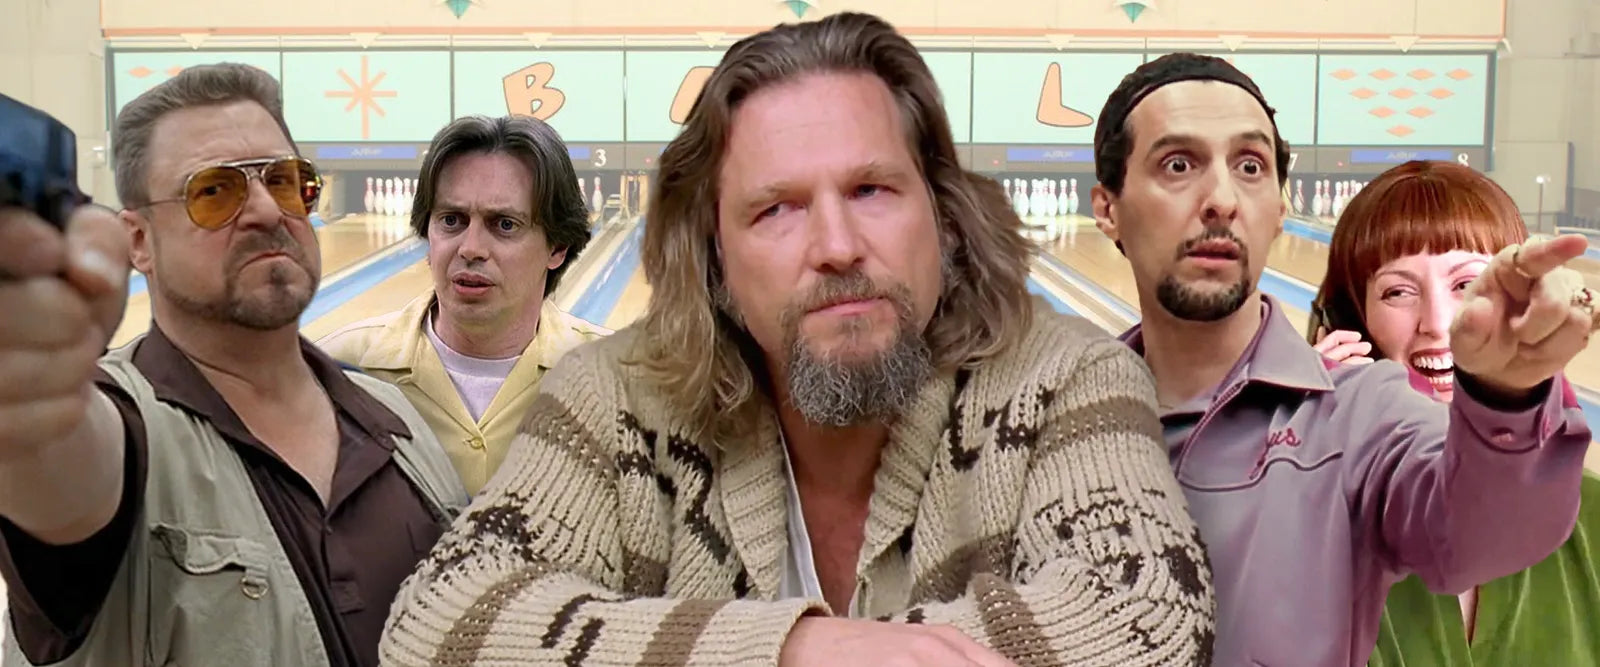 Top 15 Quotes from The Big Lebowski